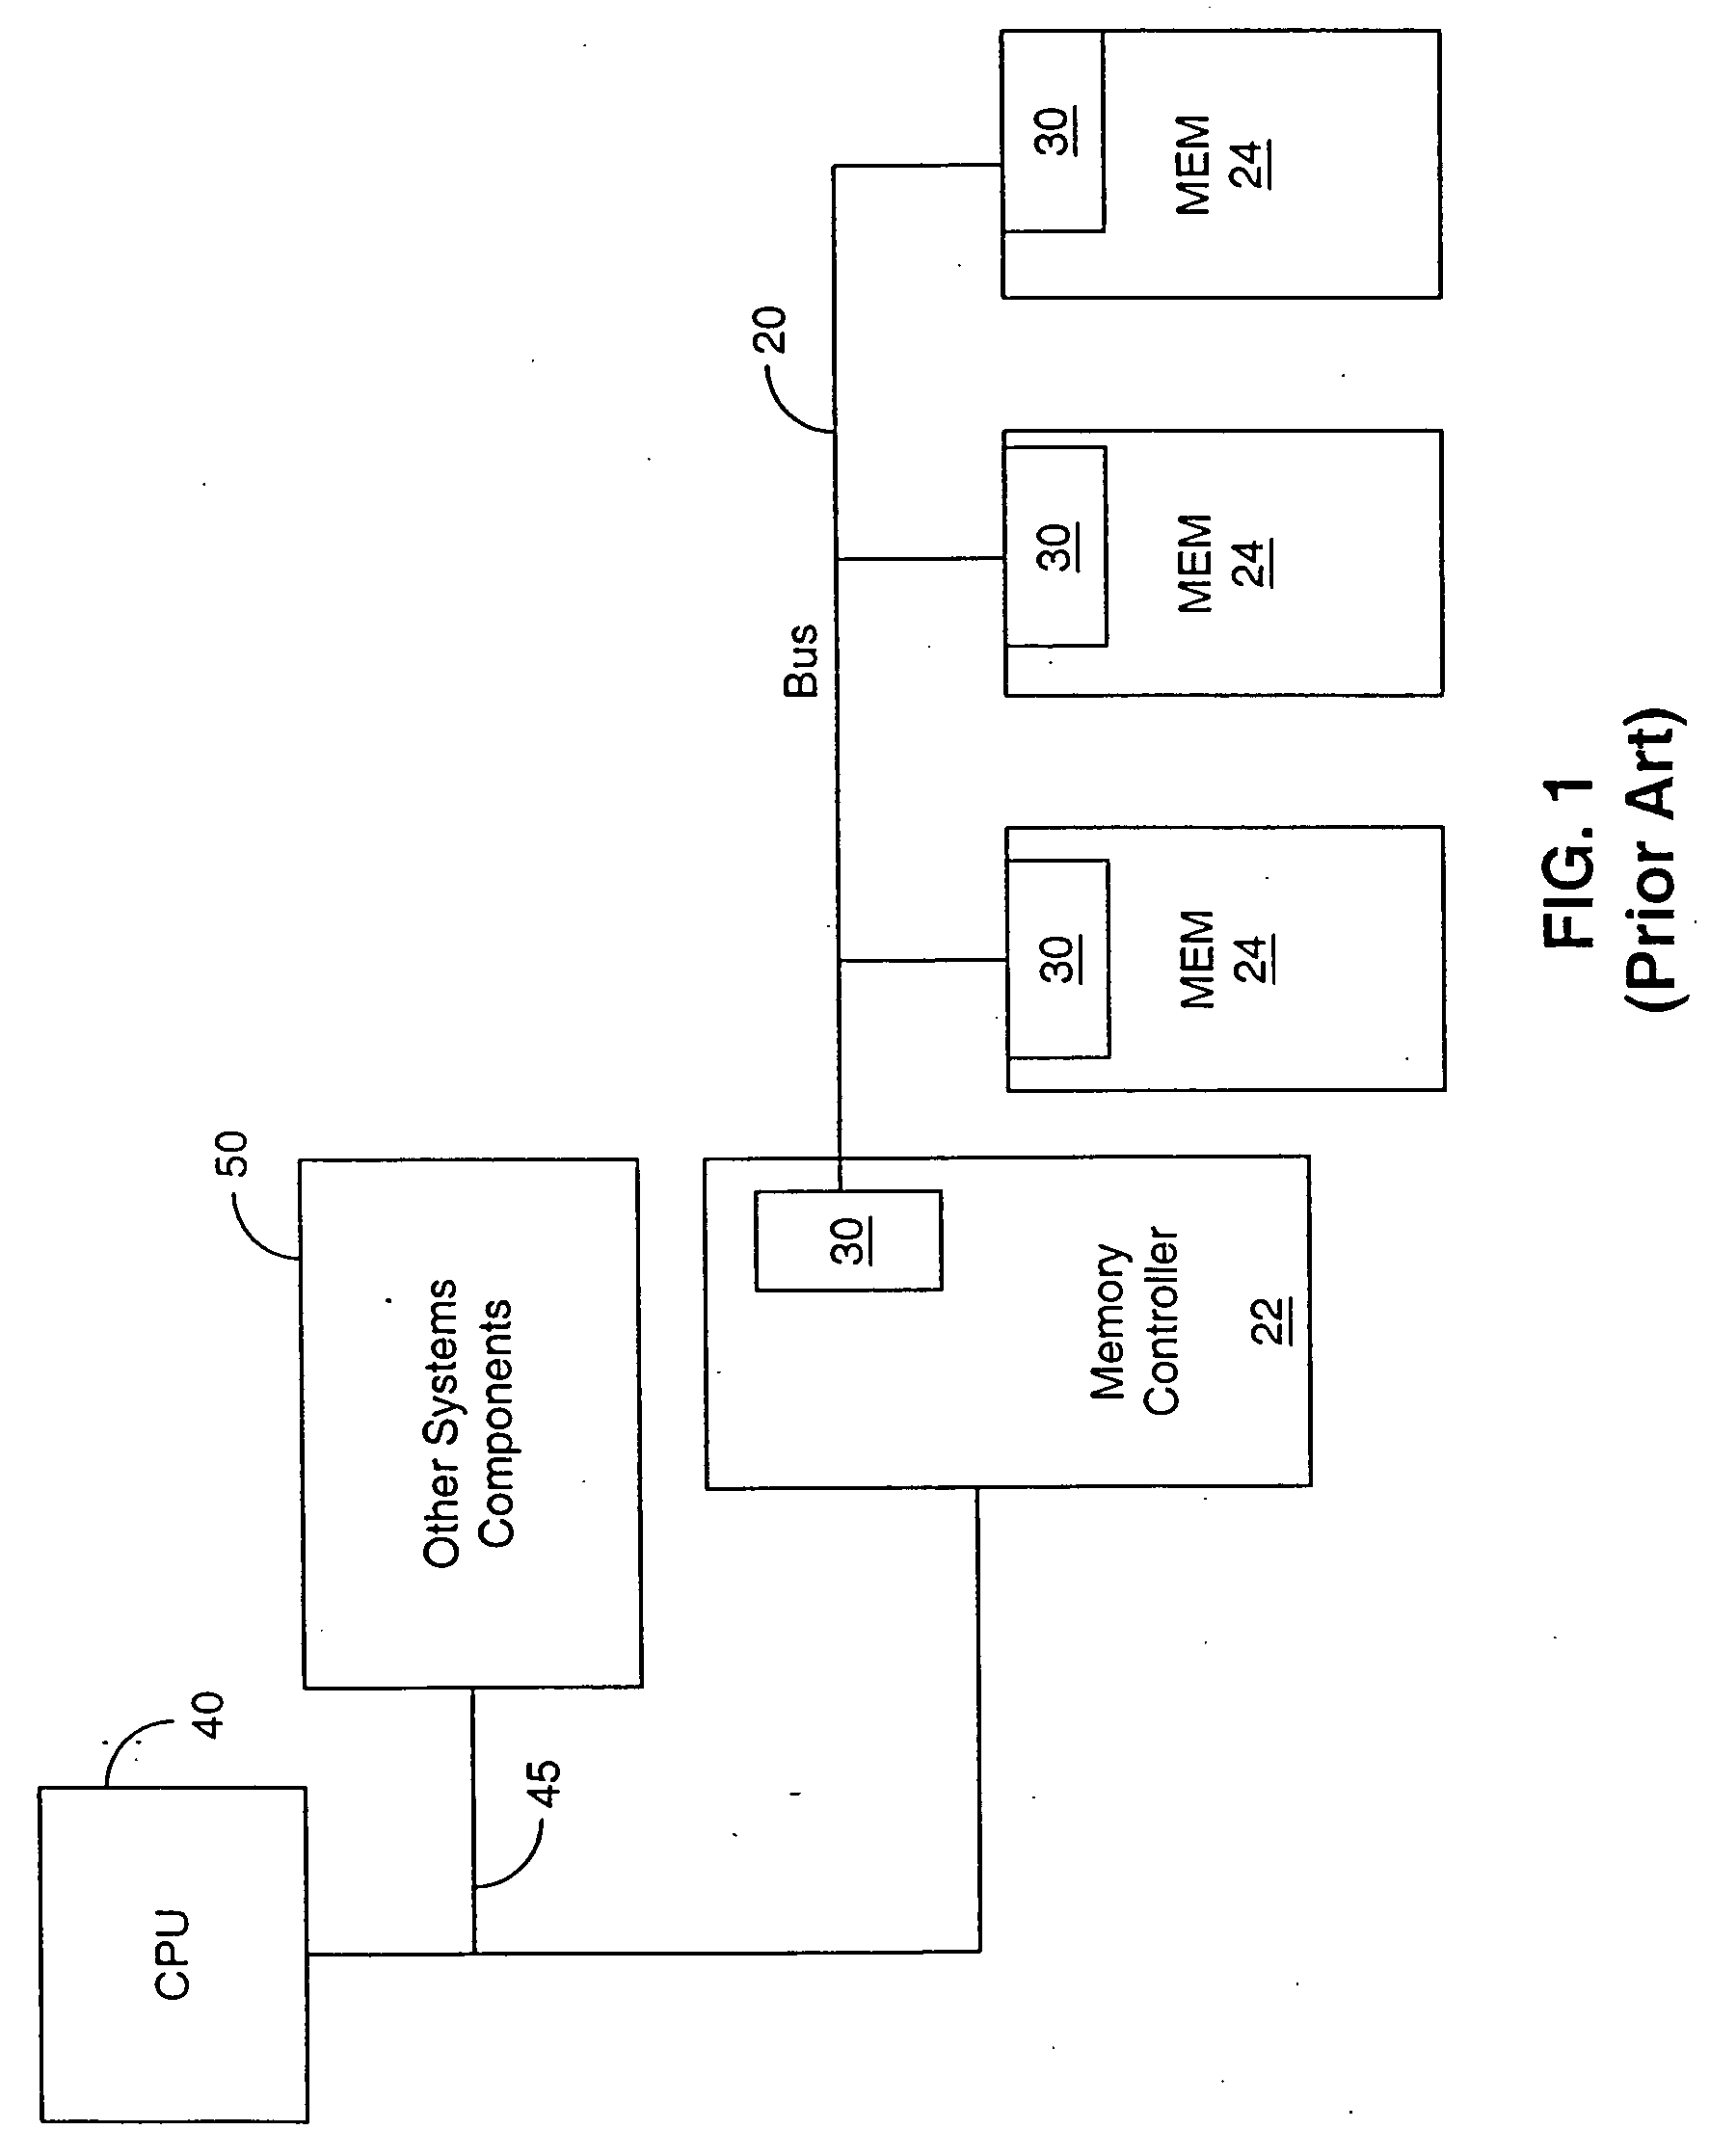 Memory device signaling system and method with independent timing calibration for parallel signal paths